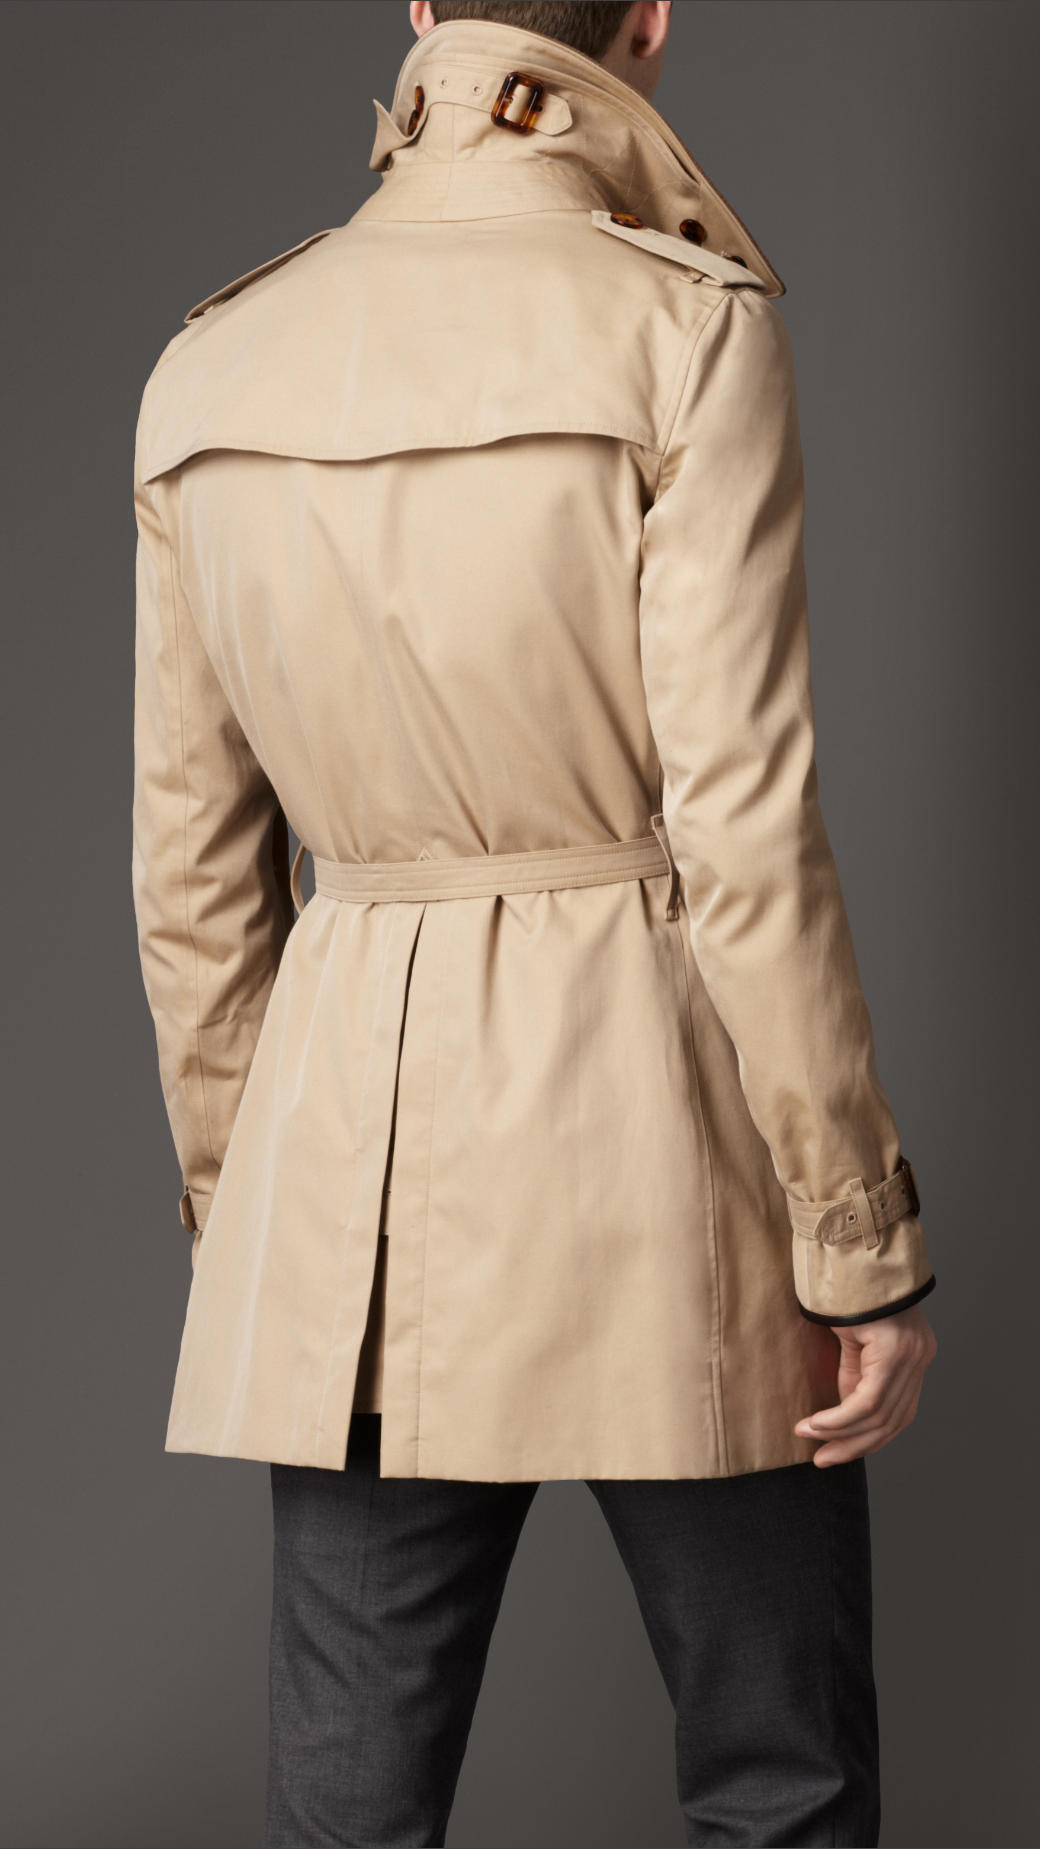 Lyst - Burberry Midlength Wool Collar Cotton Gabardine Trench Coat in ...